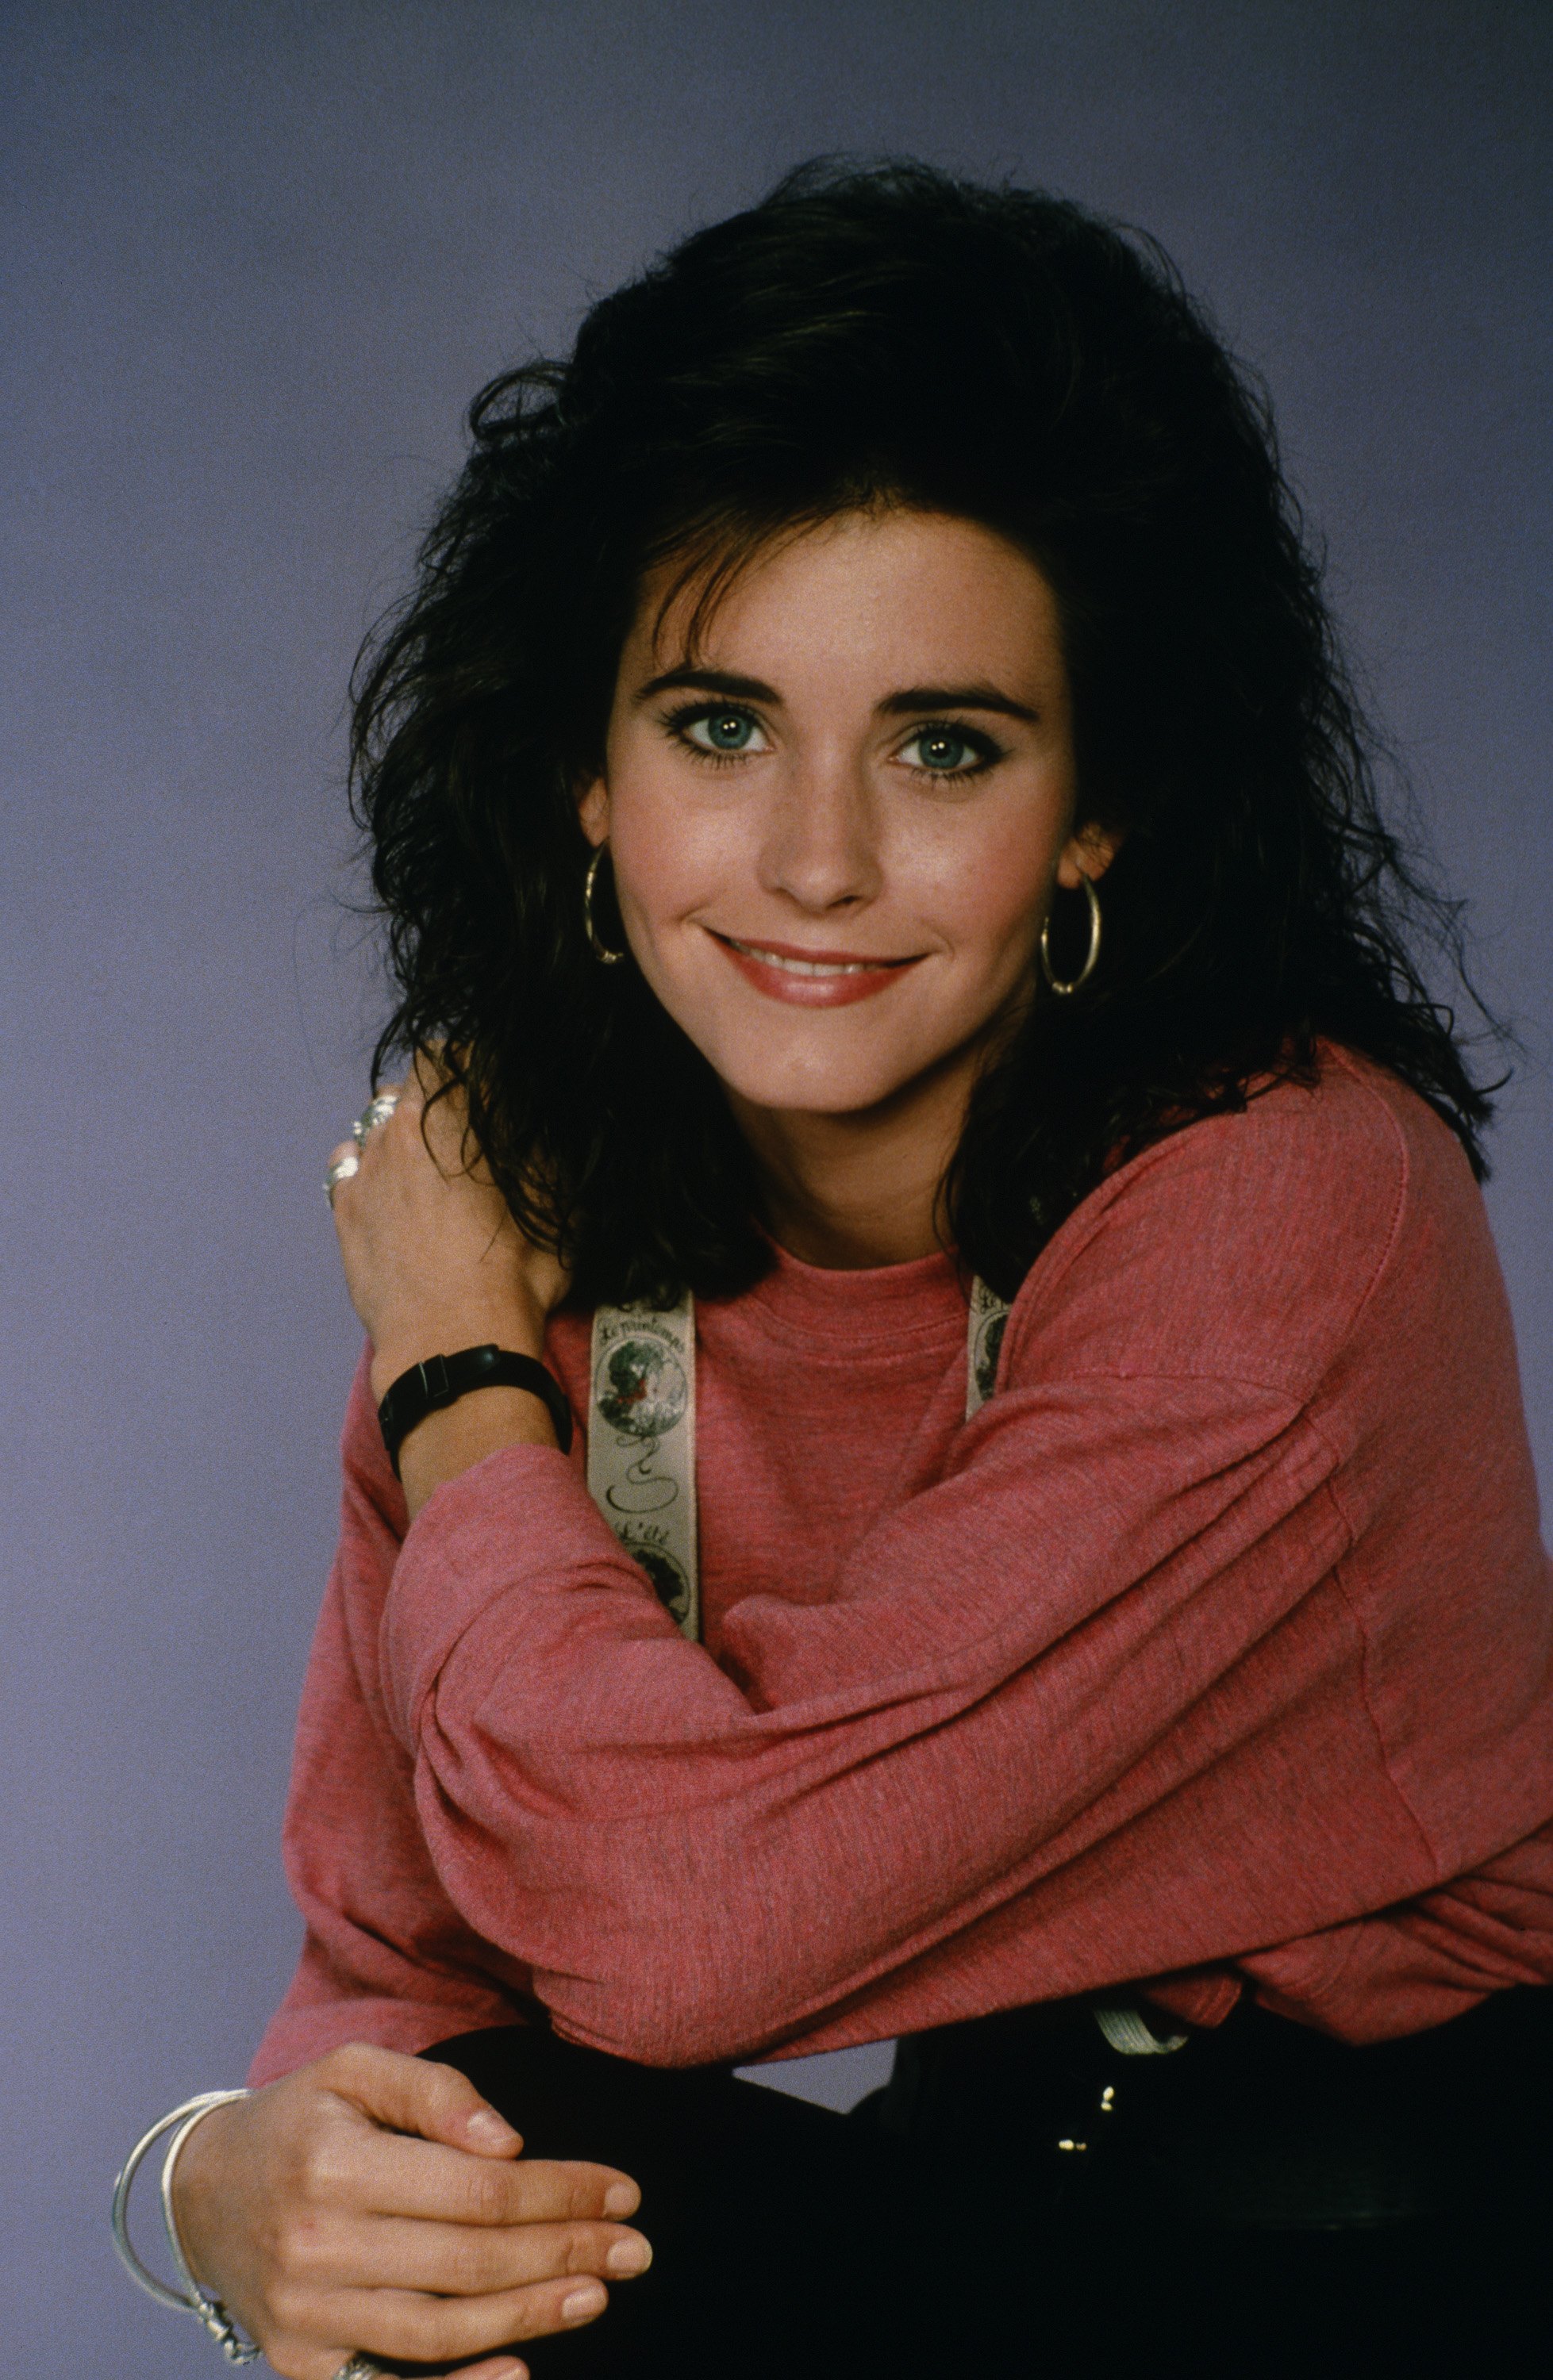 Courteney Cox during season 6 of "Family Ties" circa 1990. | Source: Getty Images